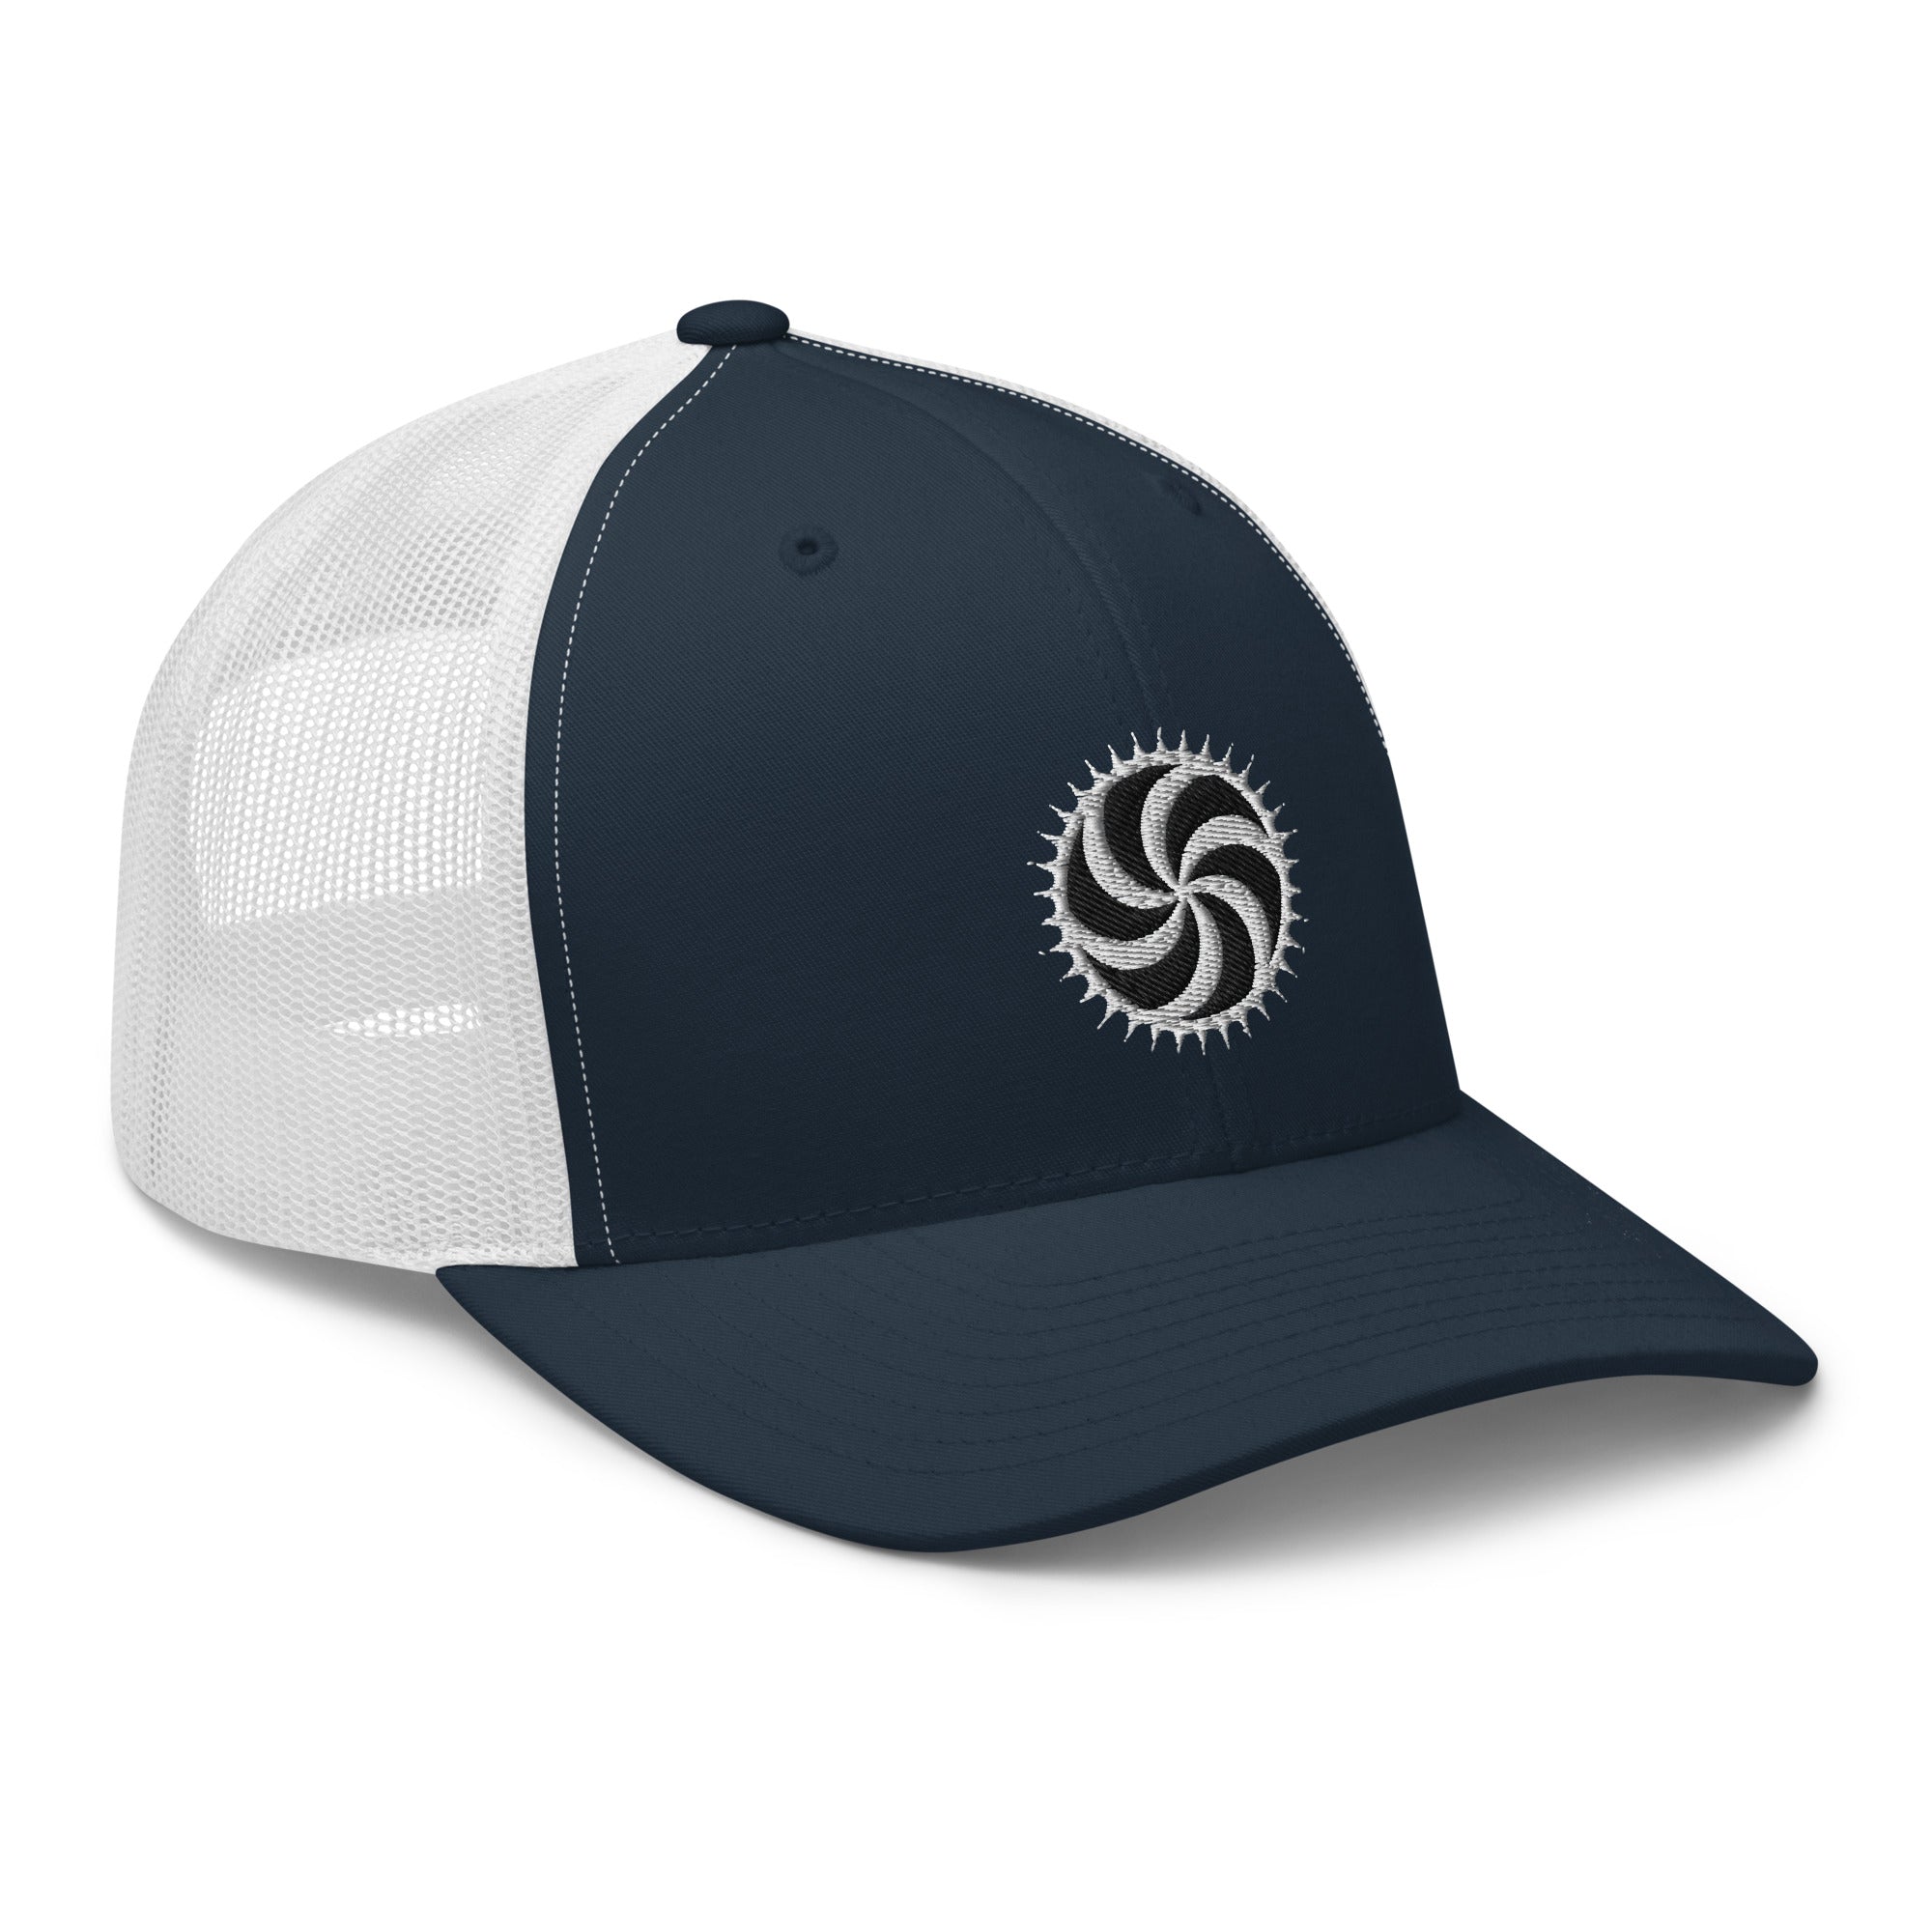 White Deadly Swirl Spike Symbol Embroidered Trucker Cap Snapback Hat